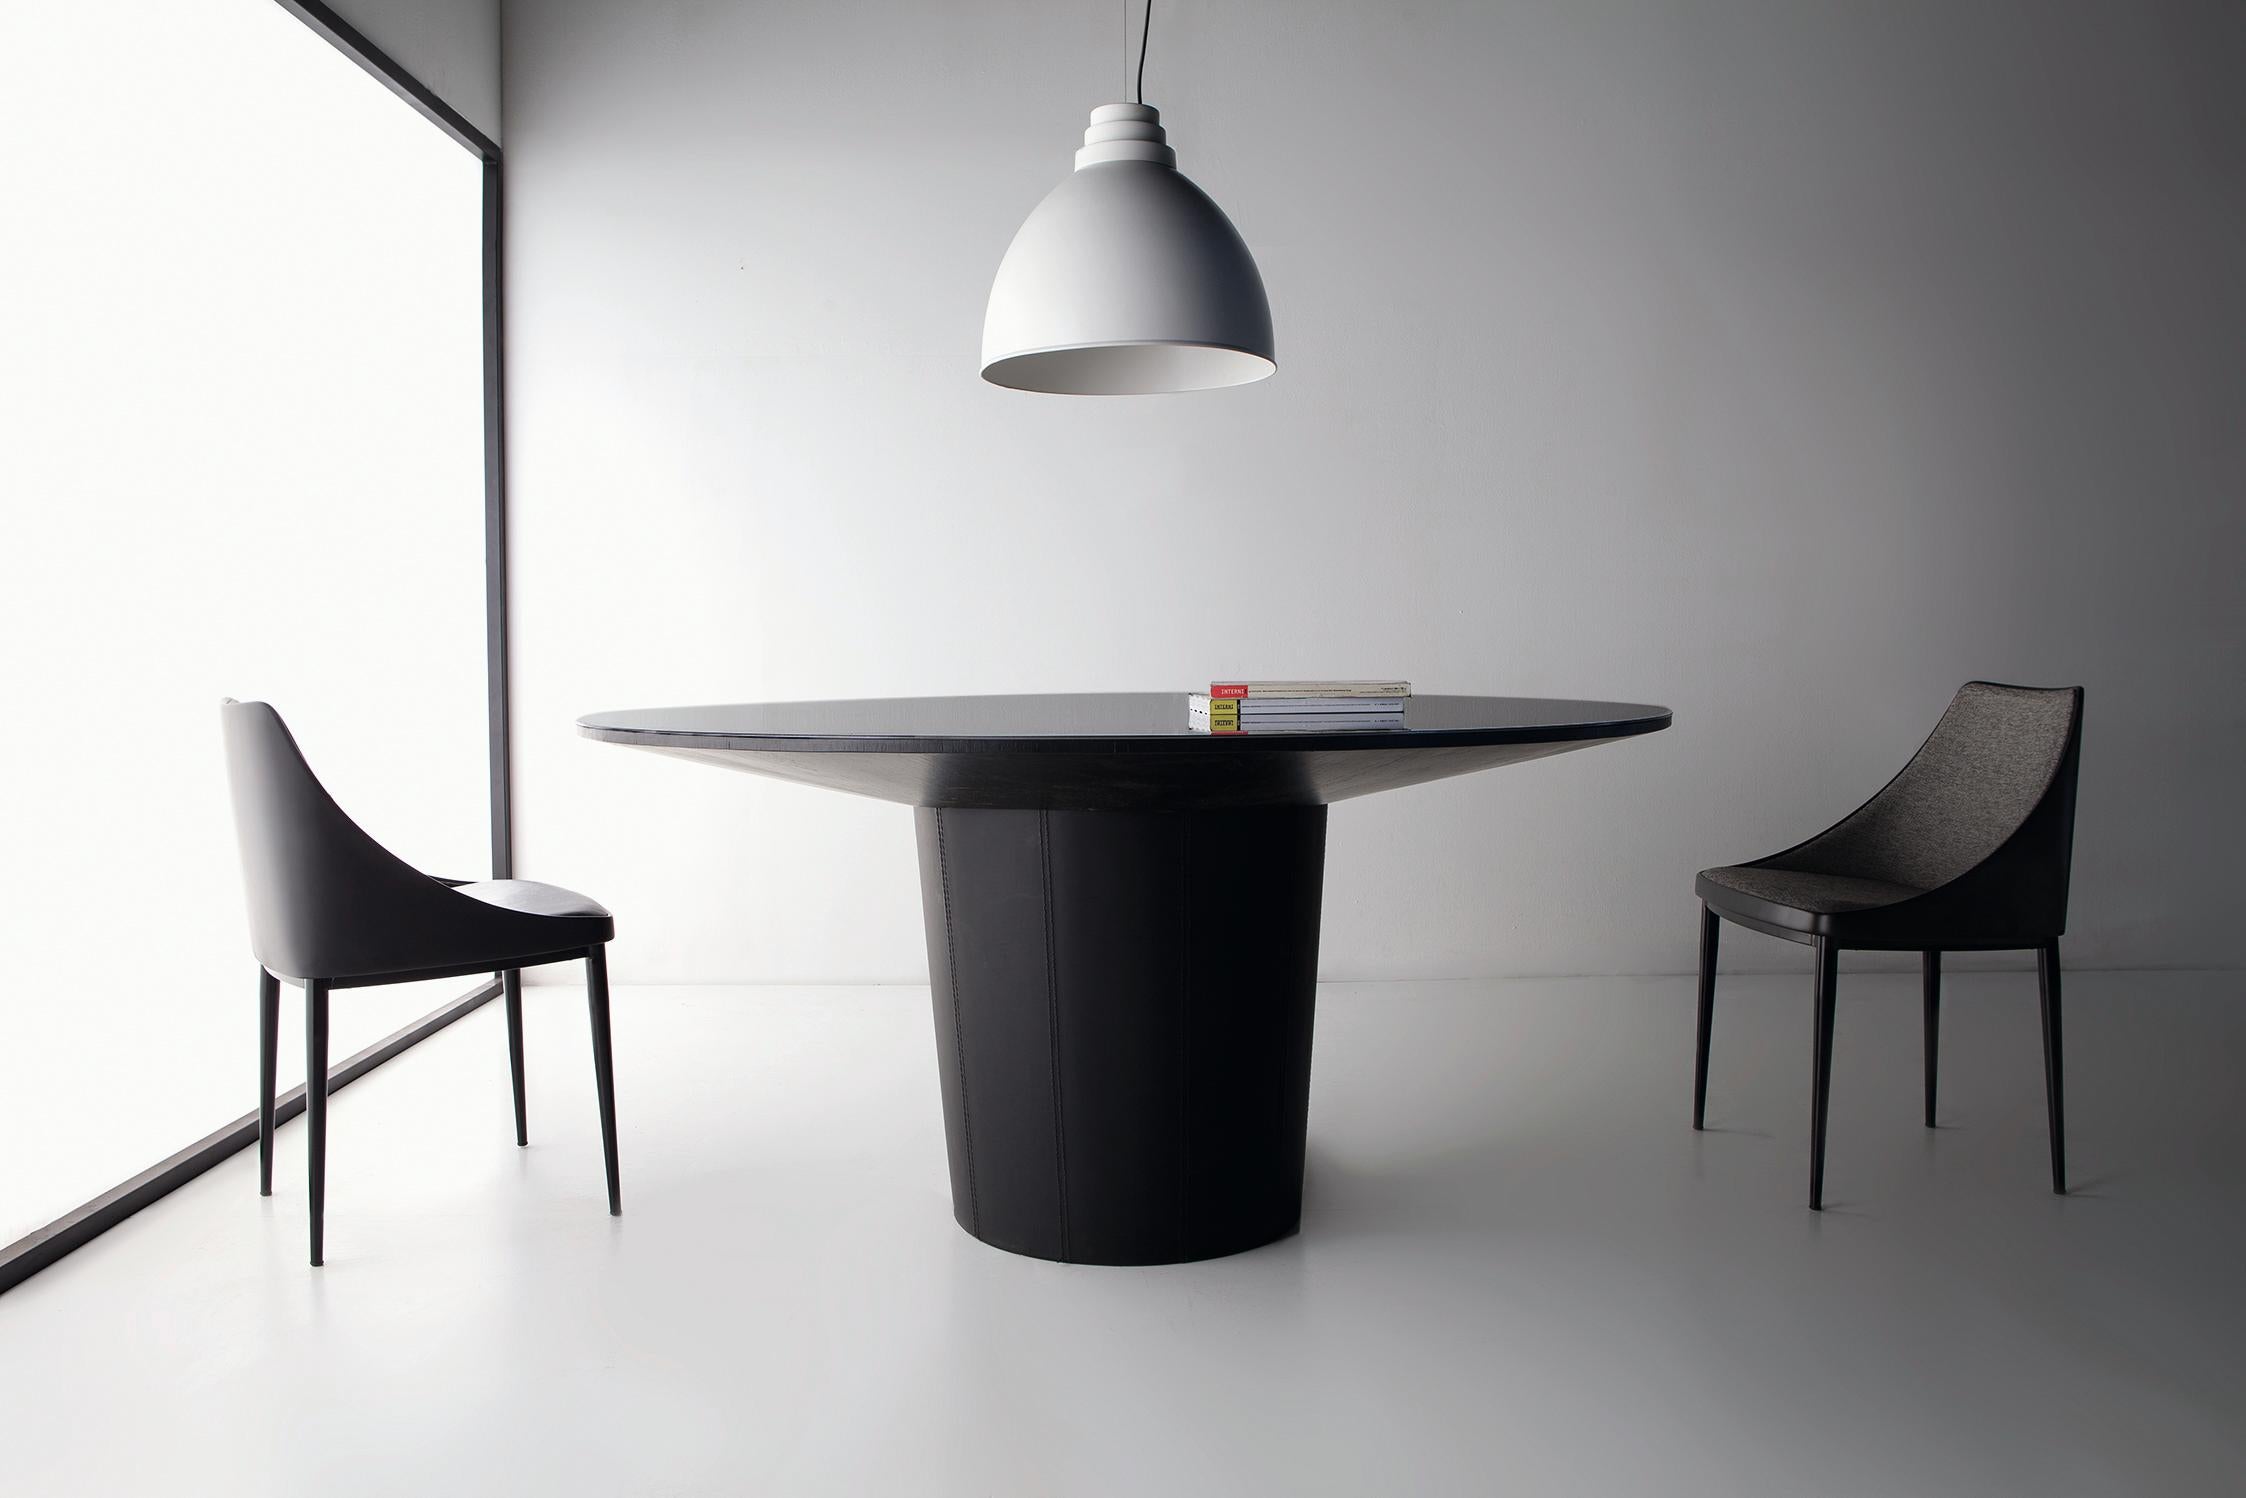 Joy Dining Table by Doimo Brasil
Dimensions: D 160 x H 75 cm 
Materials: Base: Smooth reconst. leather, Top: Veneer. 


With the intention of providing good taste and personality, Doimo deciphers trends and follows the evolution of man and his